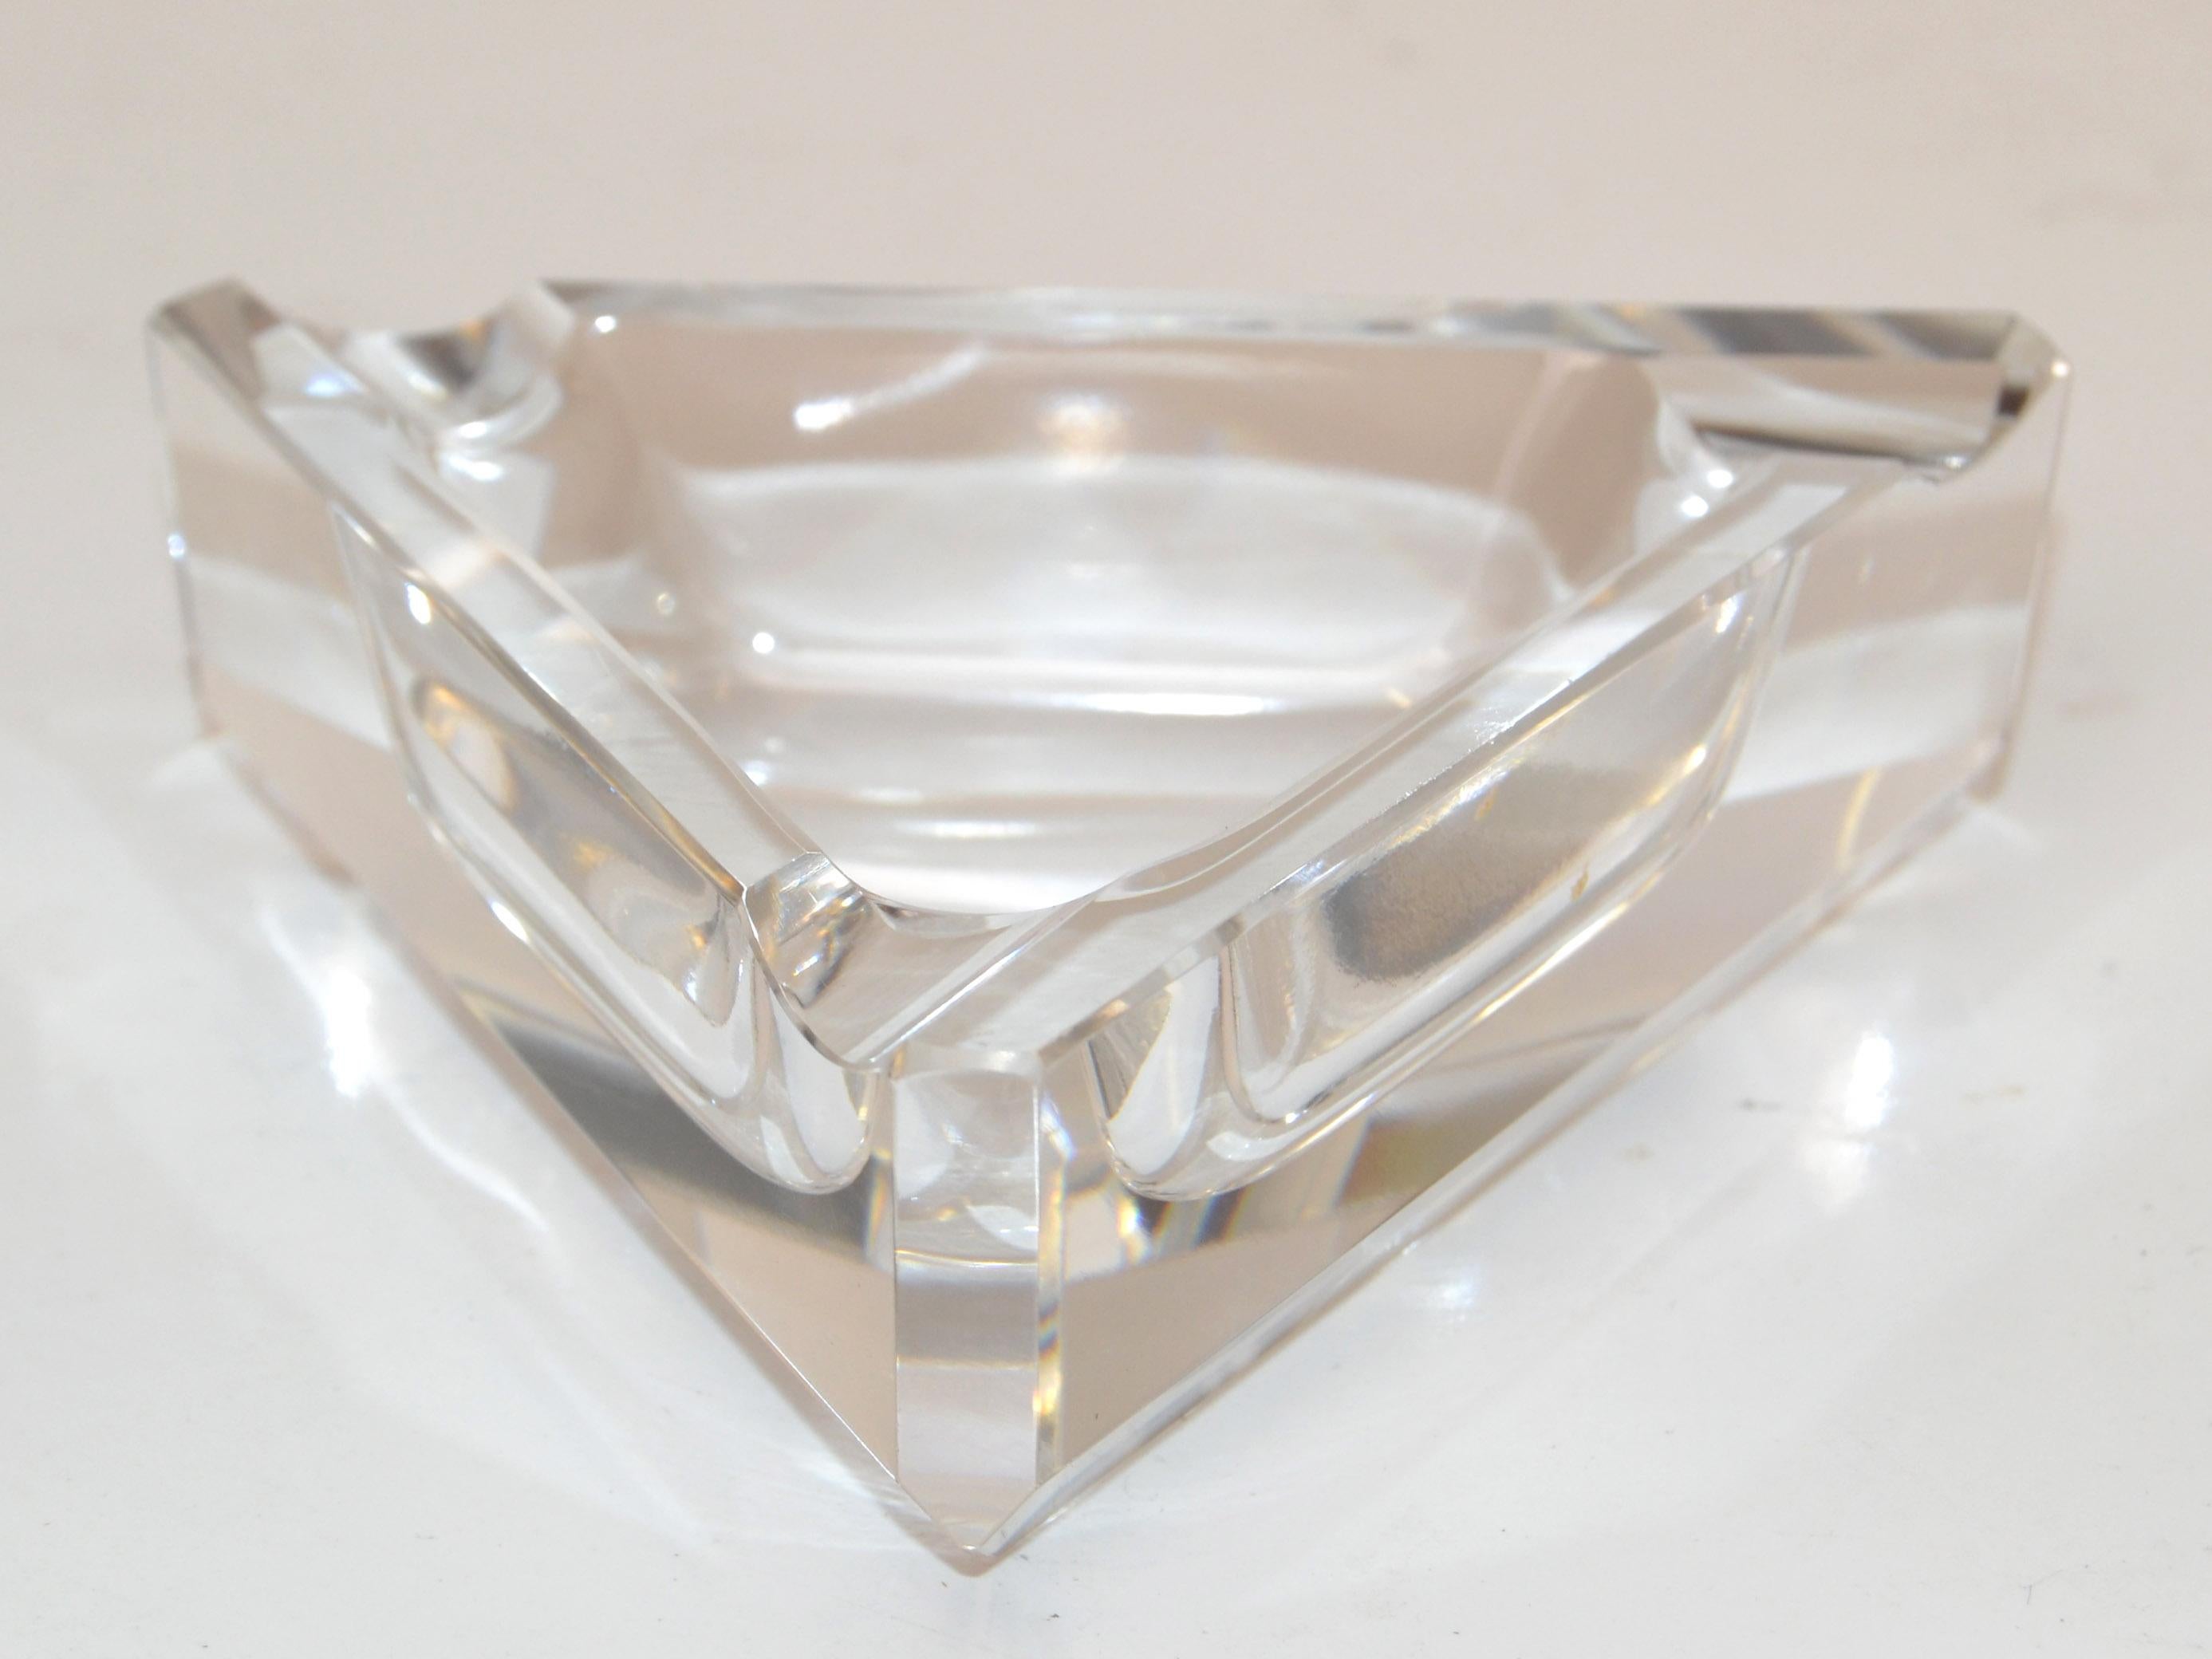 Ceska Crystal Prism Cut Triangle Ashtray Beveled Edges Art Deco Bohemian Glass  In Good Condition For Sale In Miami, FL